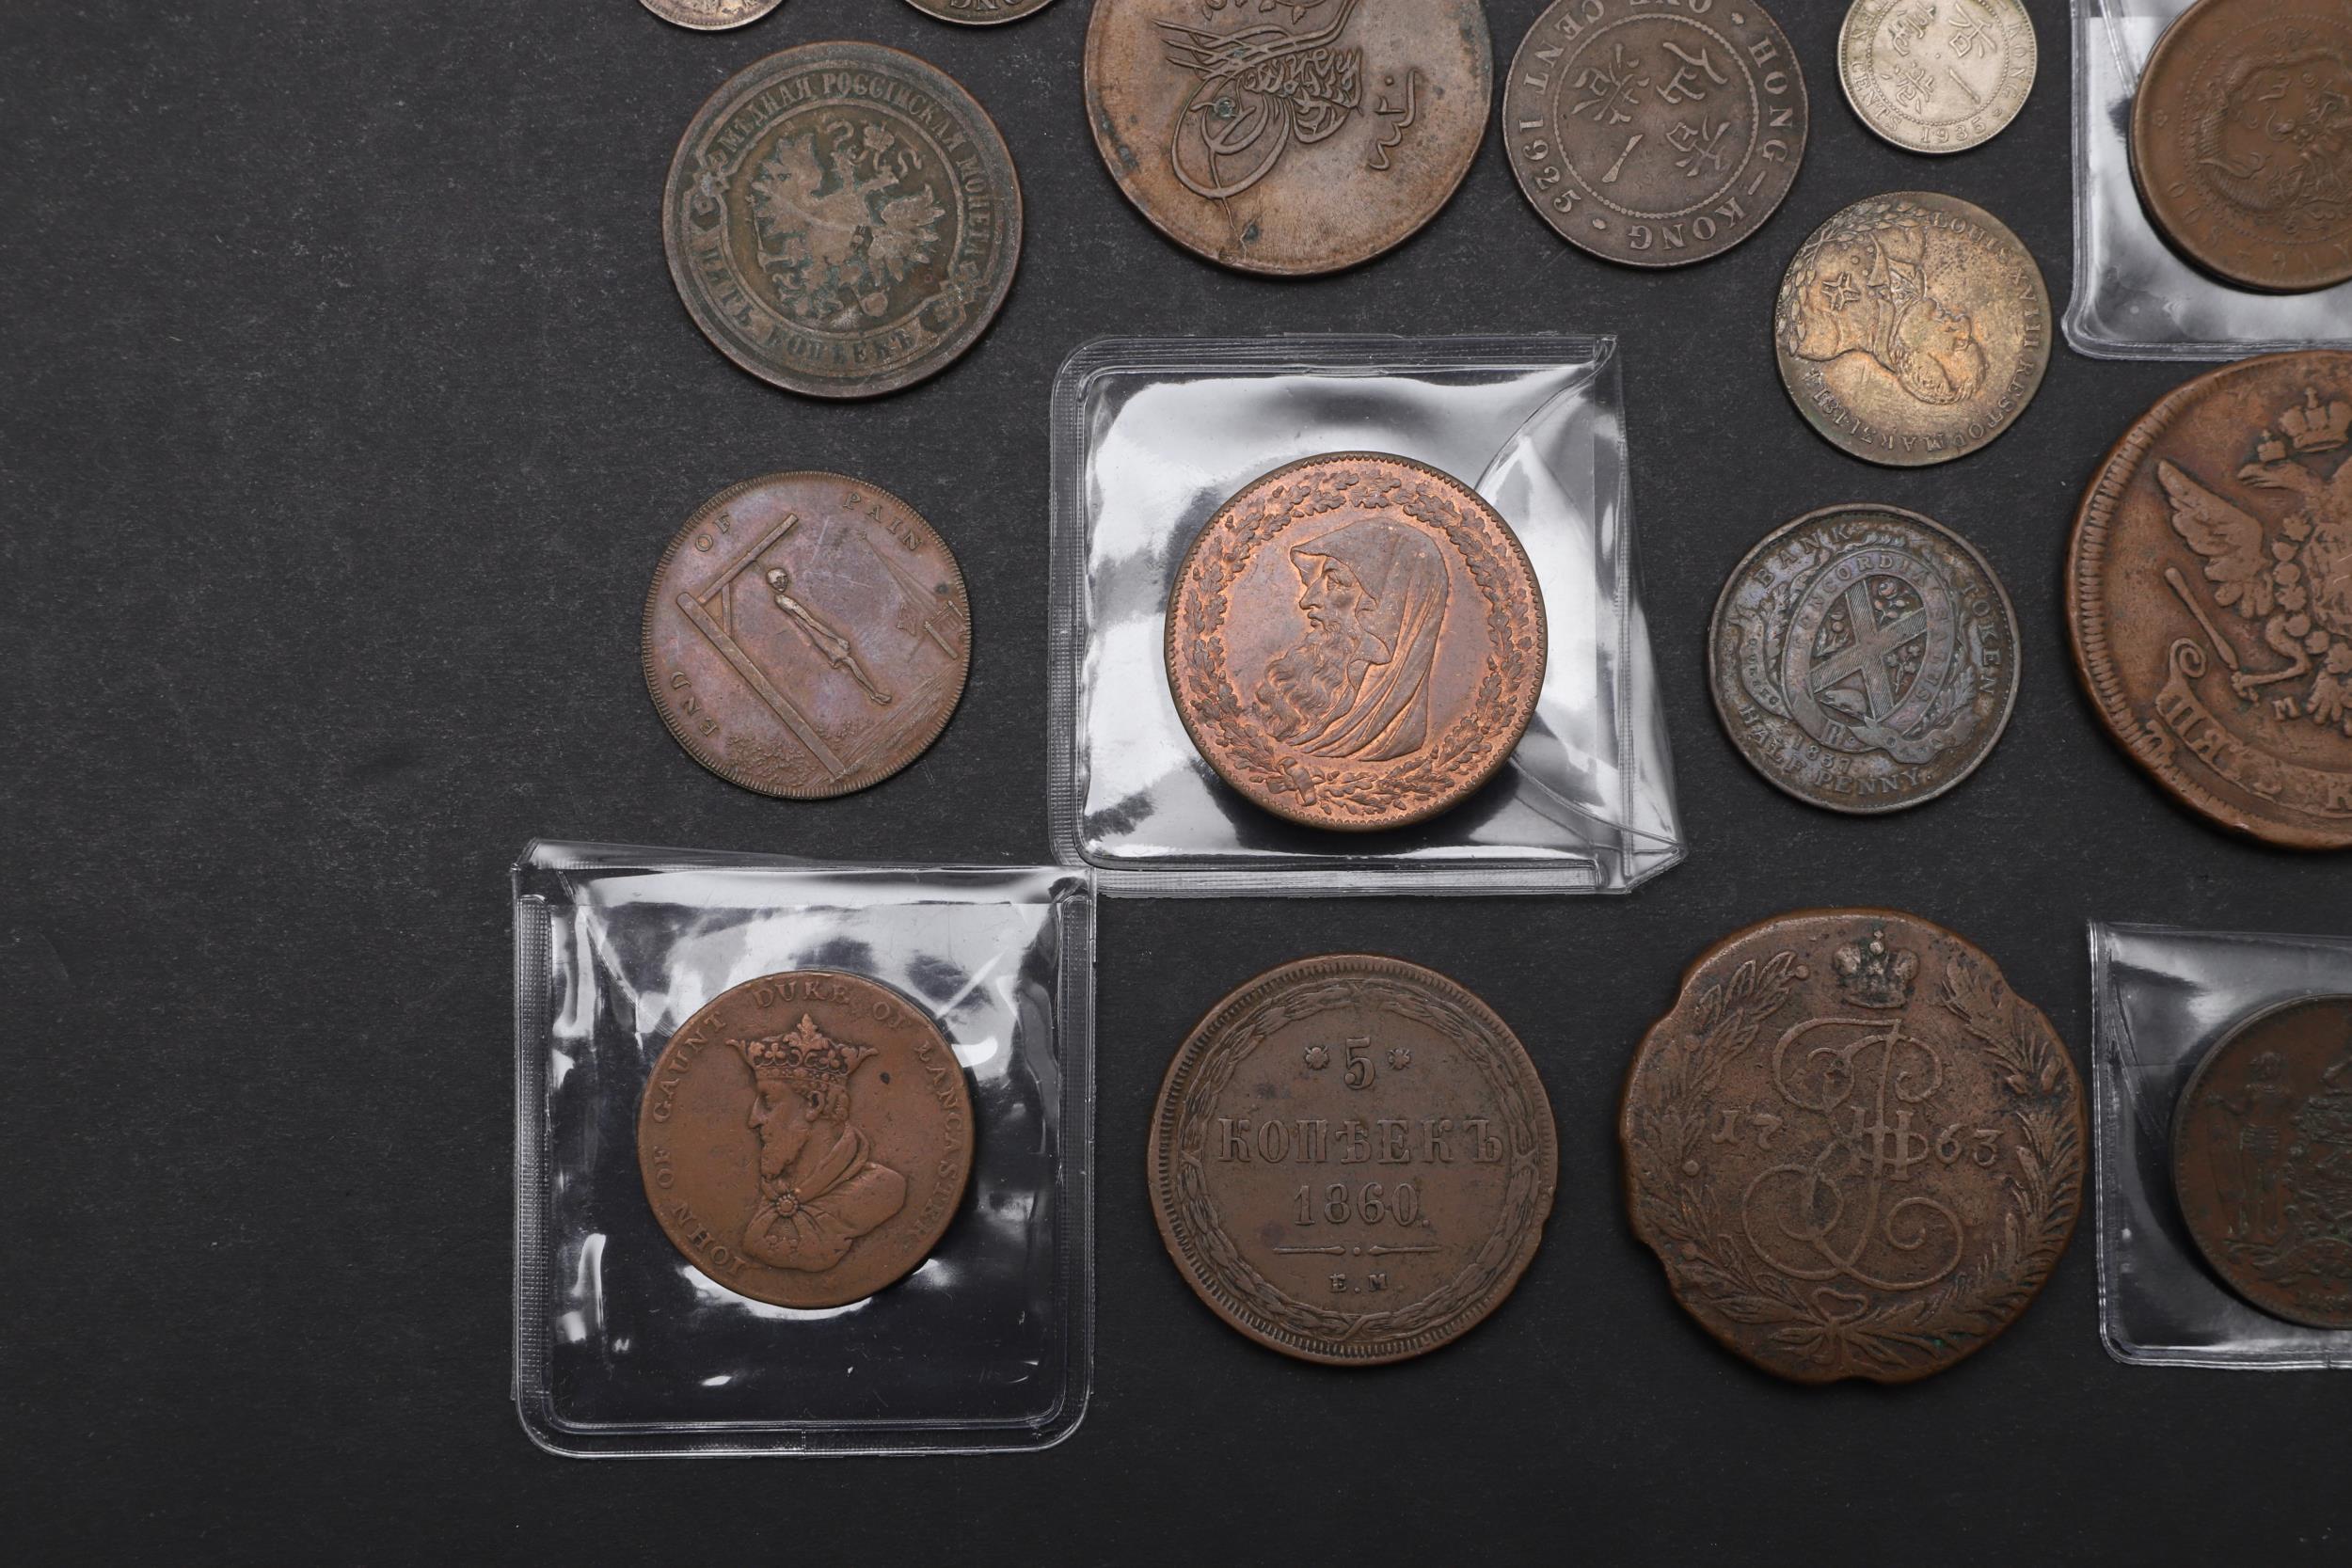 A SMALL COLLECTION OF RUSSIAN COINS. - Image 5 of 7